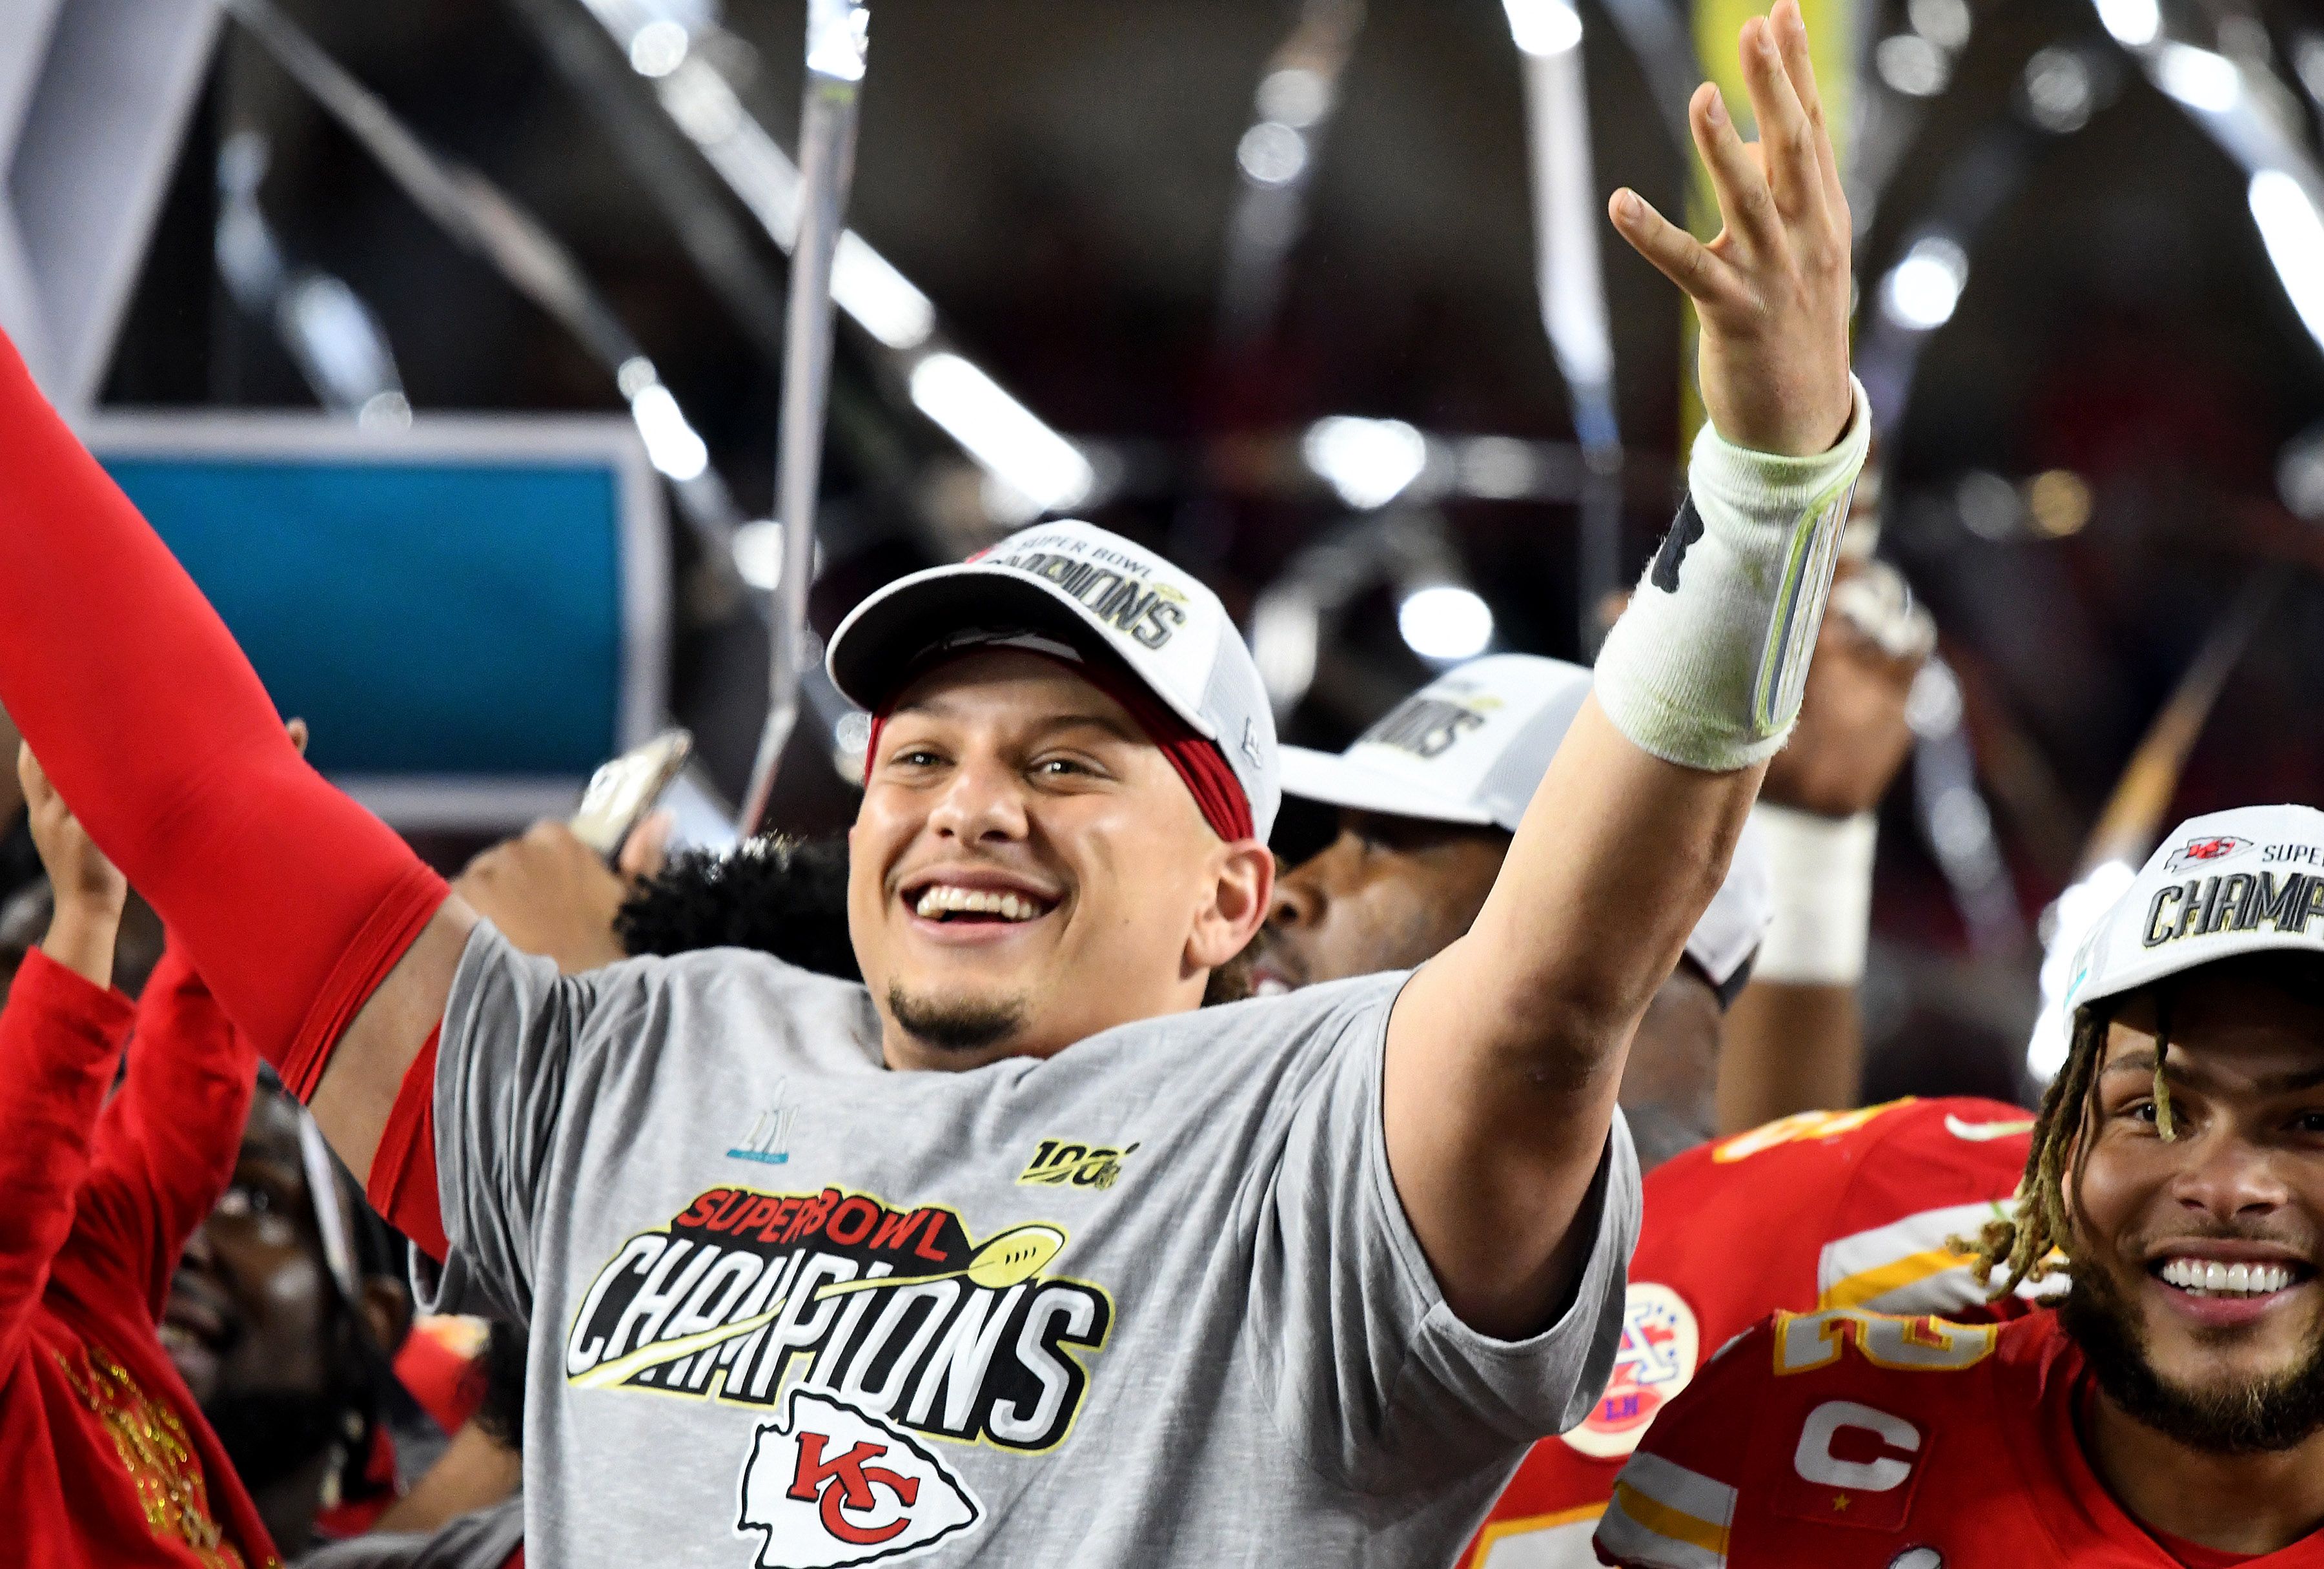 Patrick Mahomes Kansas City Chiefs Unsigned Super Bowl LVII Champions  Celebrating with the Lombardi Trophy Photograph